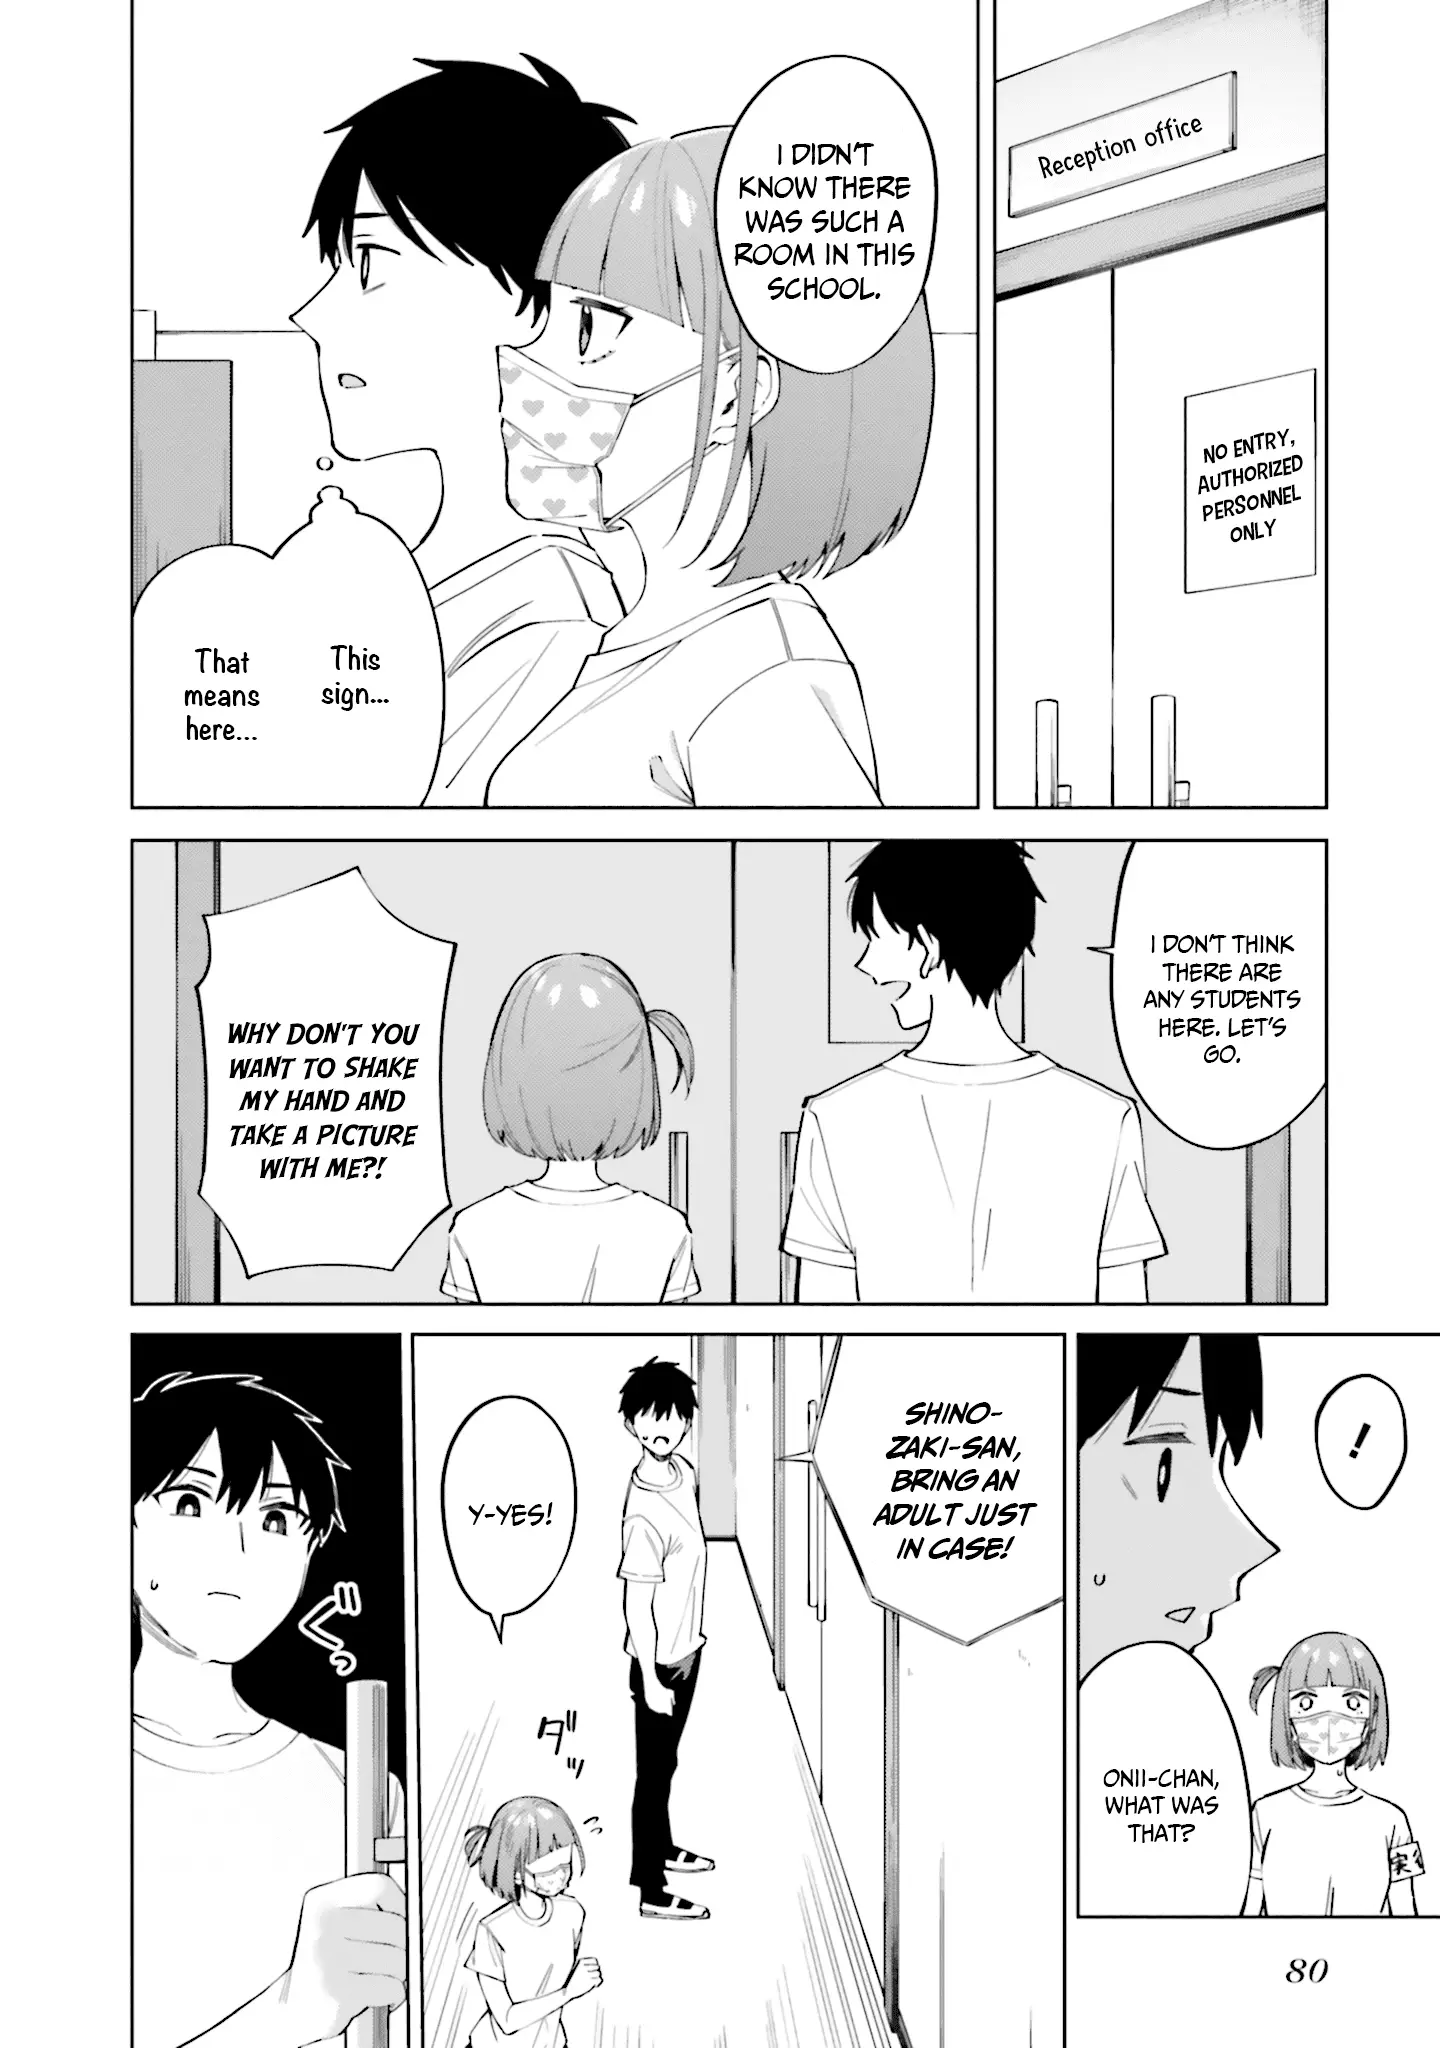 I Don't Understand Shirogane-San's Facial Expression At All - 15 page 25-799eb208